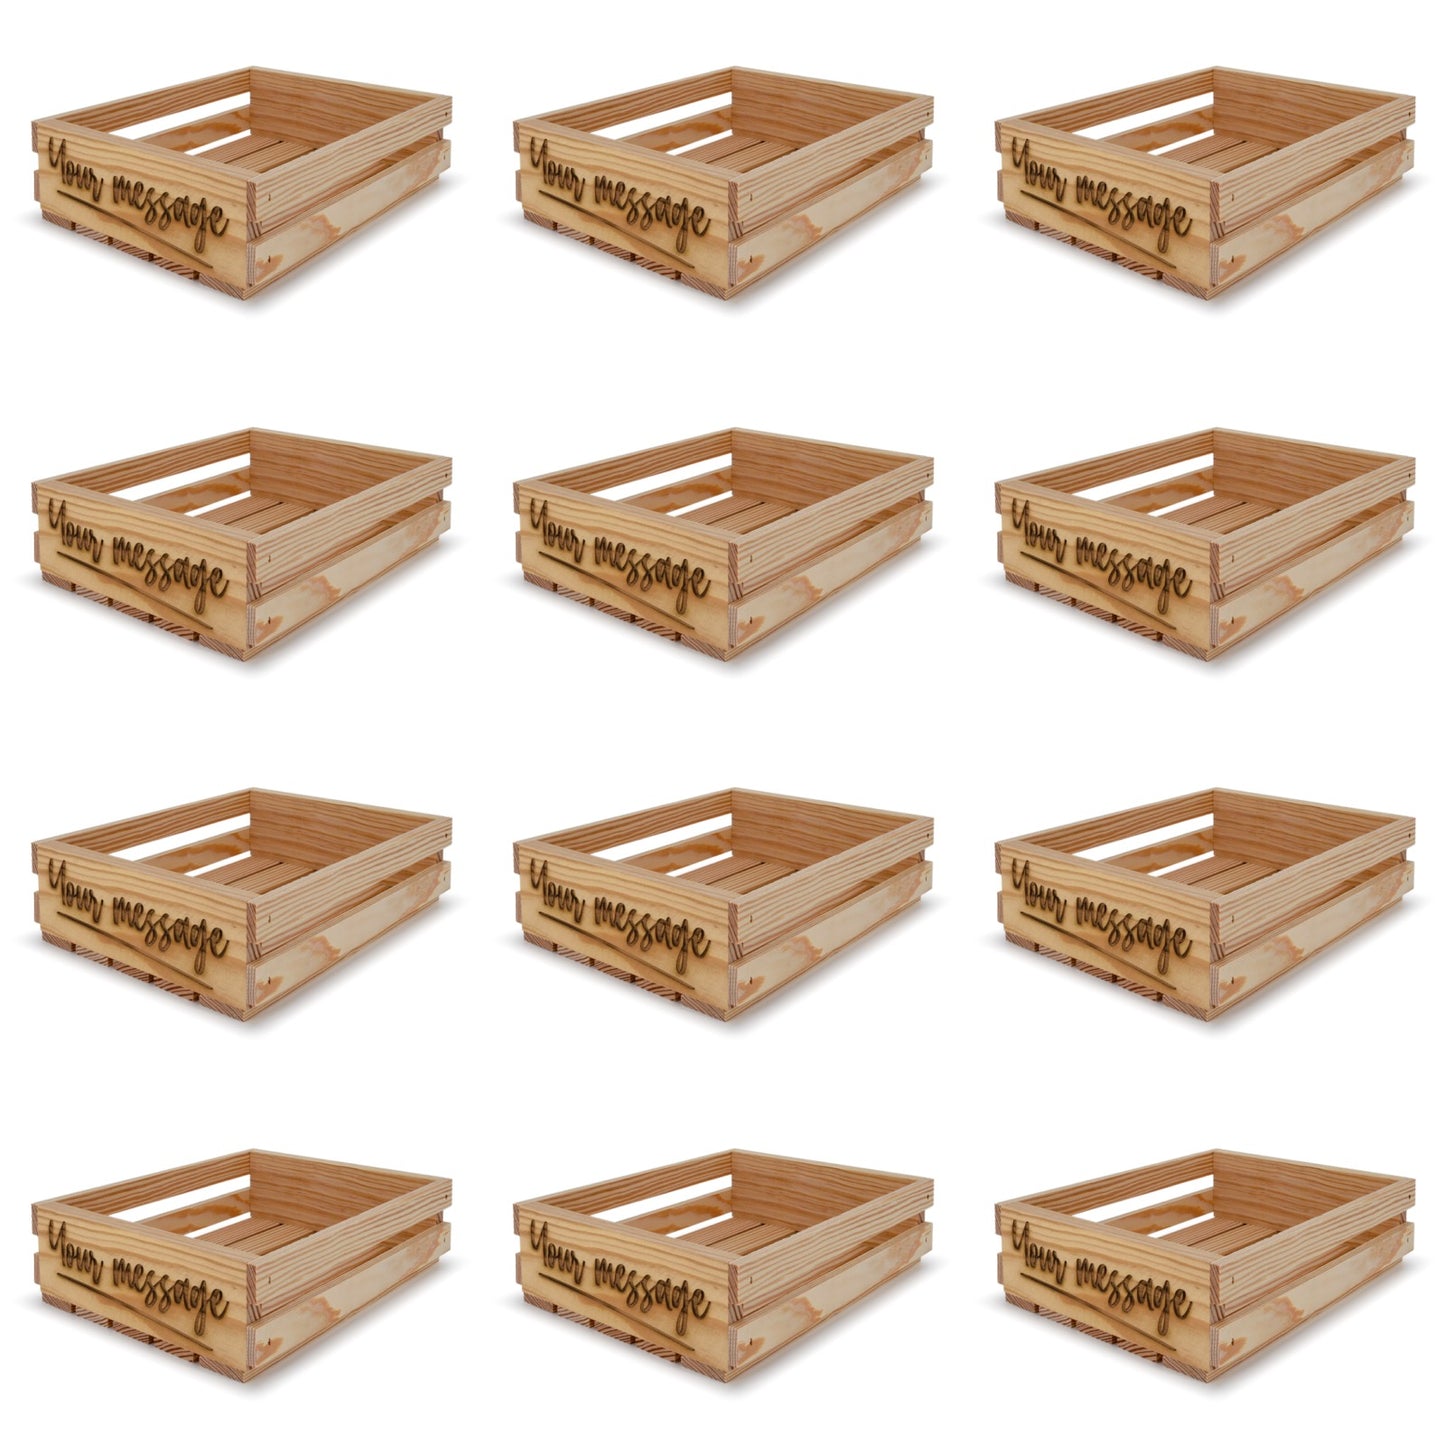 12 Small wooden crates 12x10x3.5 your message included